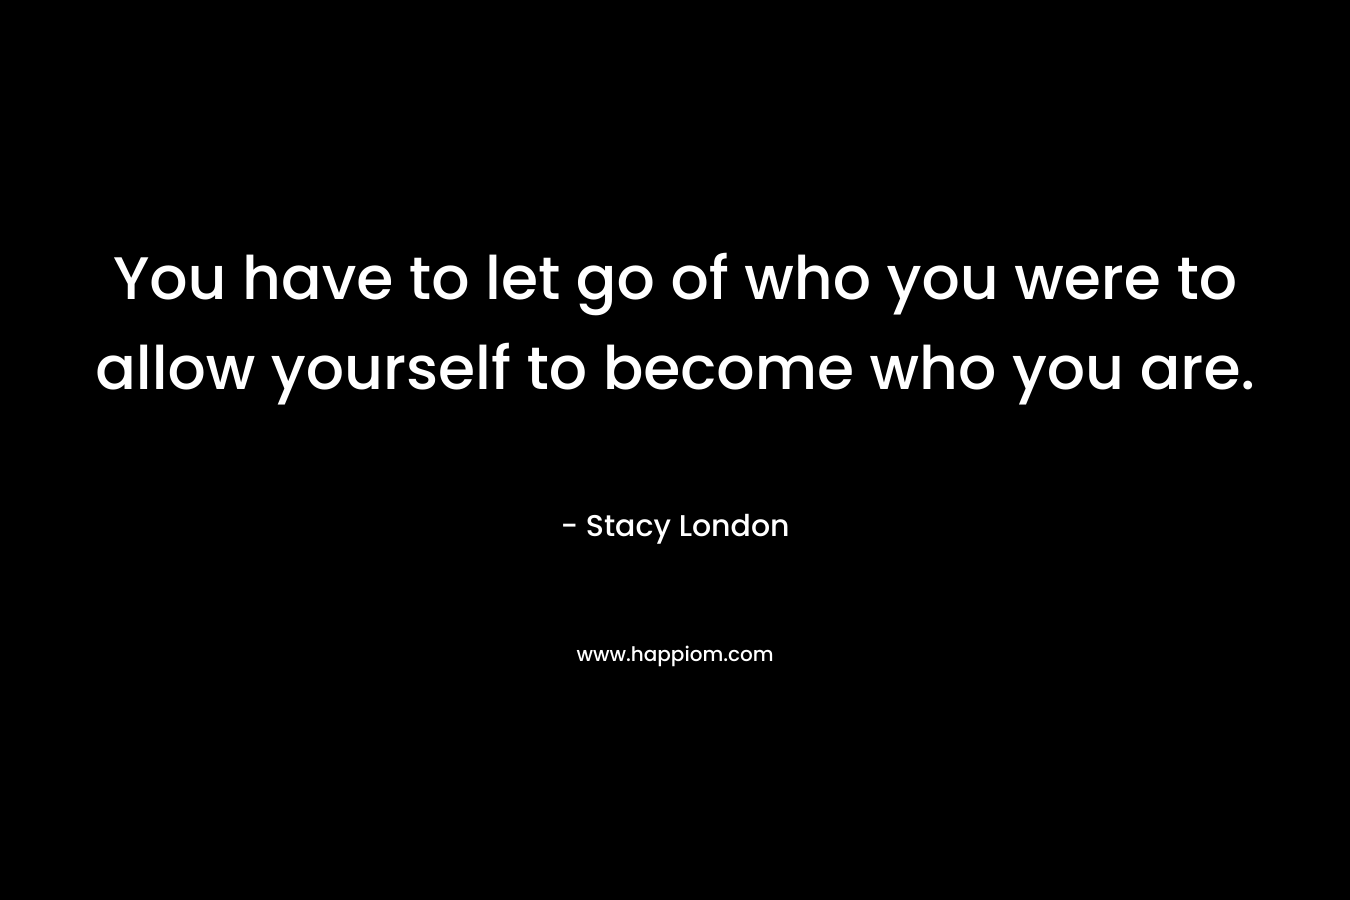 You have to let go of who you were to allow yourself to become who you are. – Stacy London